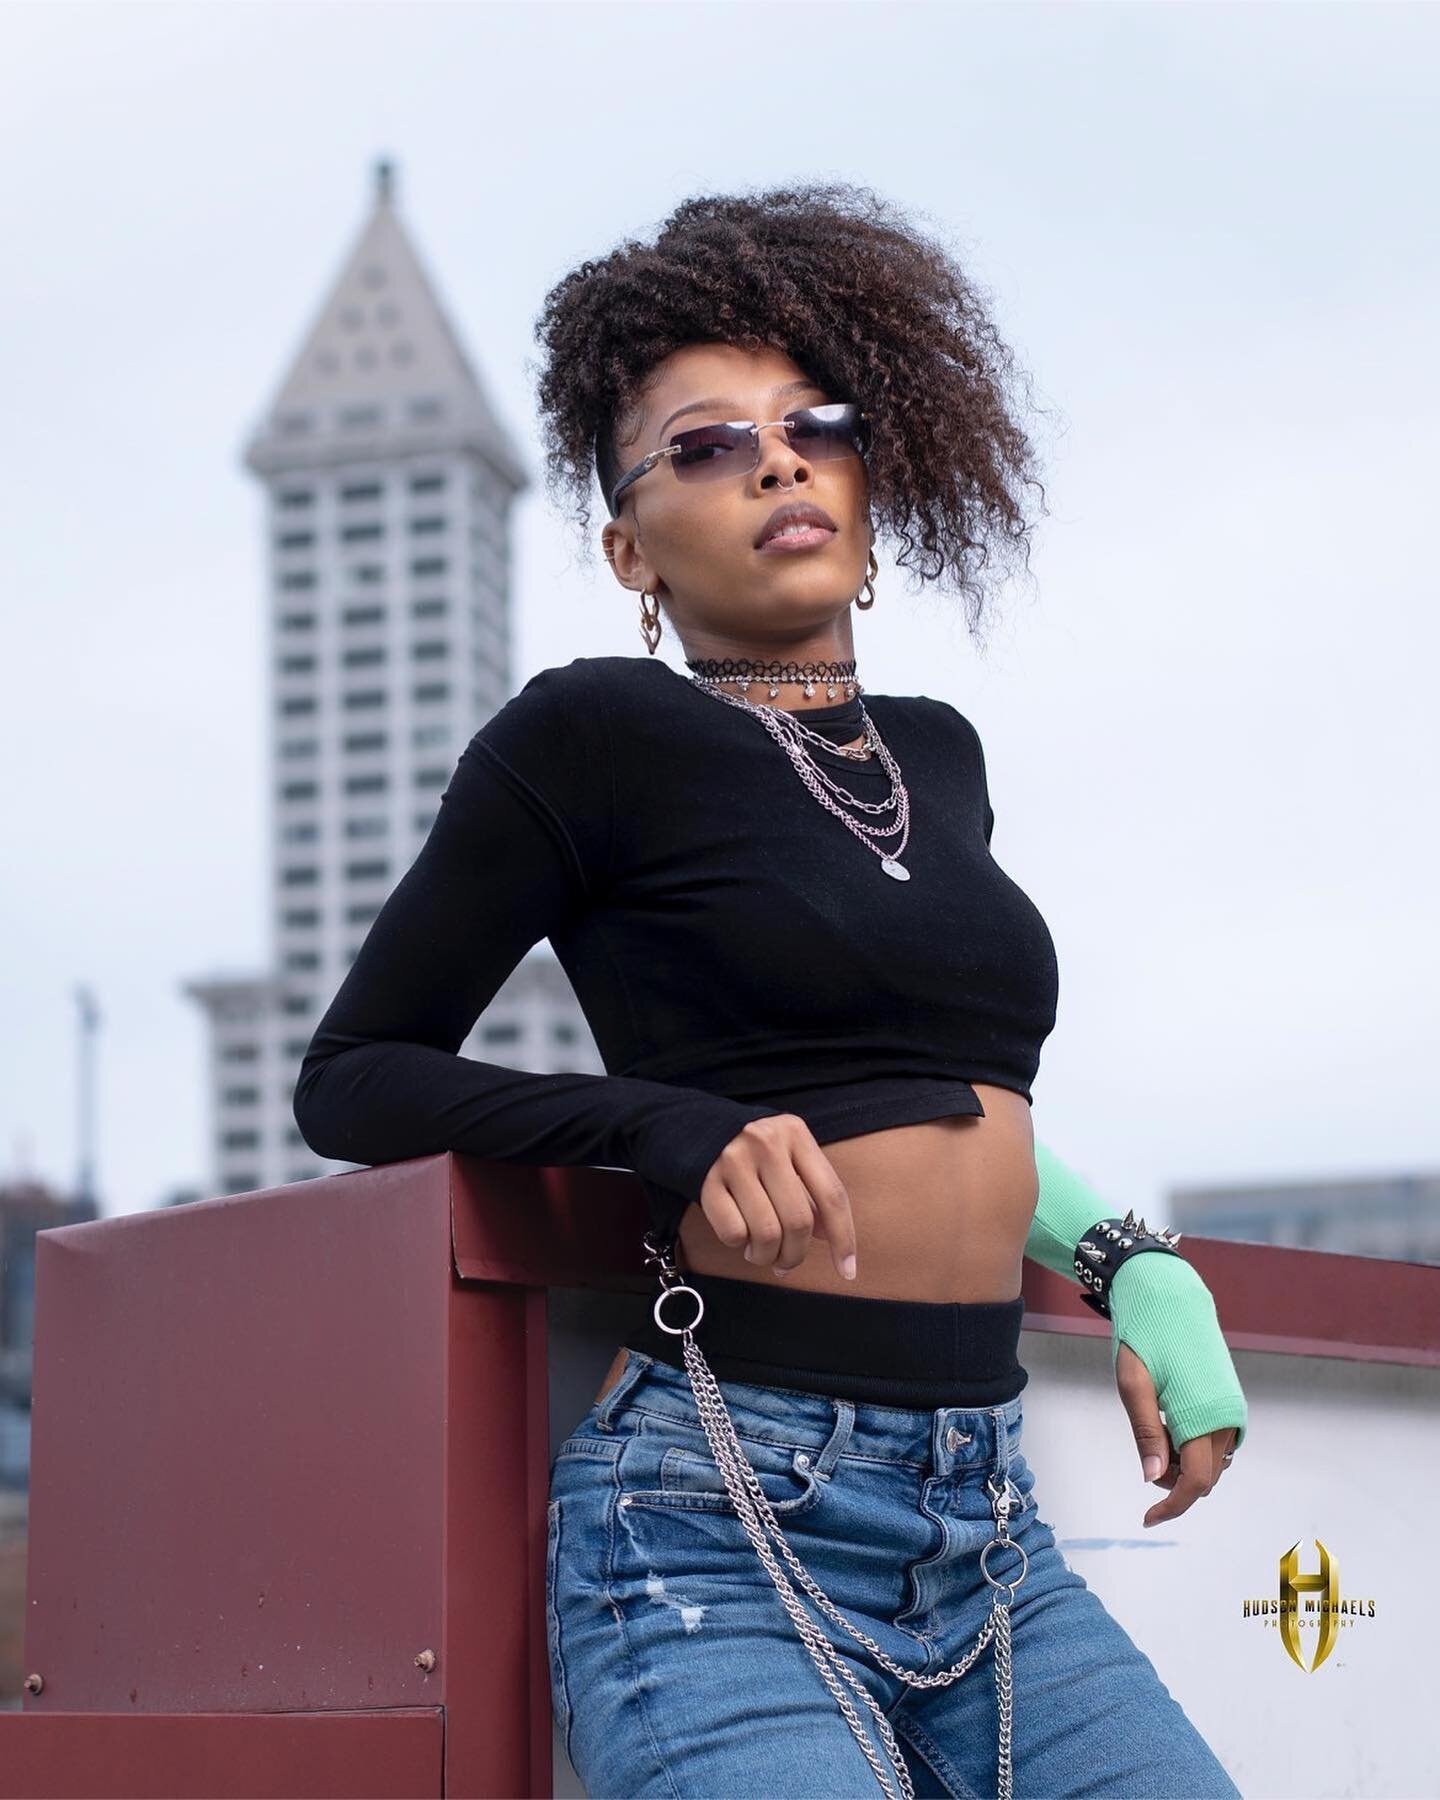 If you haven&rsquo;t shot on @illuminate.seattle rooftop then your missing out 😉

📸: @hudsonmichaelsphotography 
Model: @_marjae_ 

For a chance to be featured tag&nbsp;#StreetMeetWA
&mdash;&mdash;&mdash;&mdash;&mdash;&mdash;&mdash;&mdash;&mdash;&m